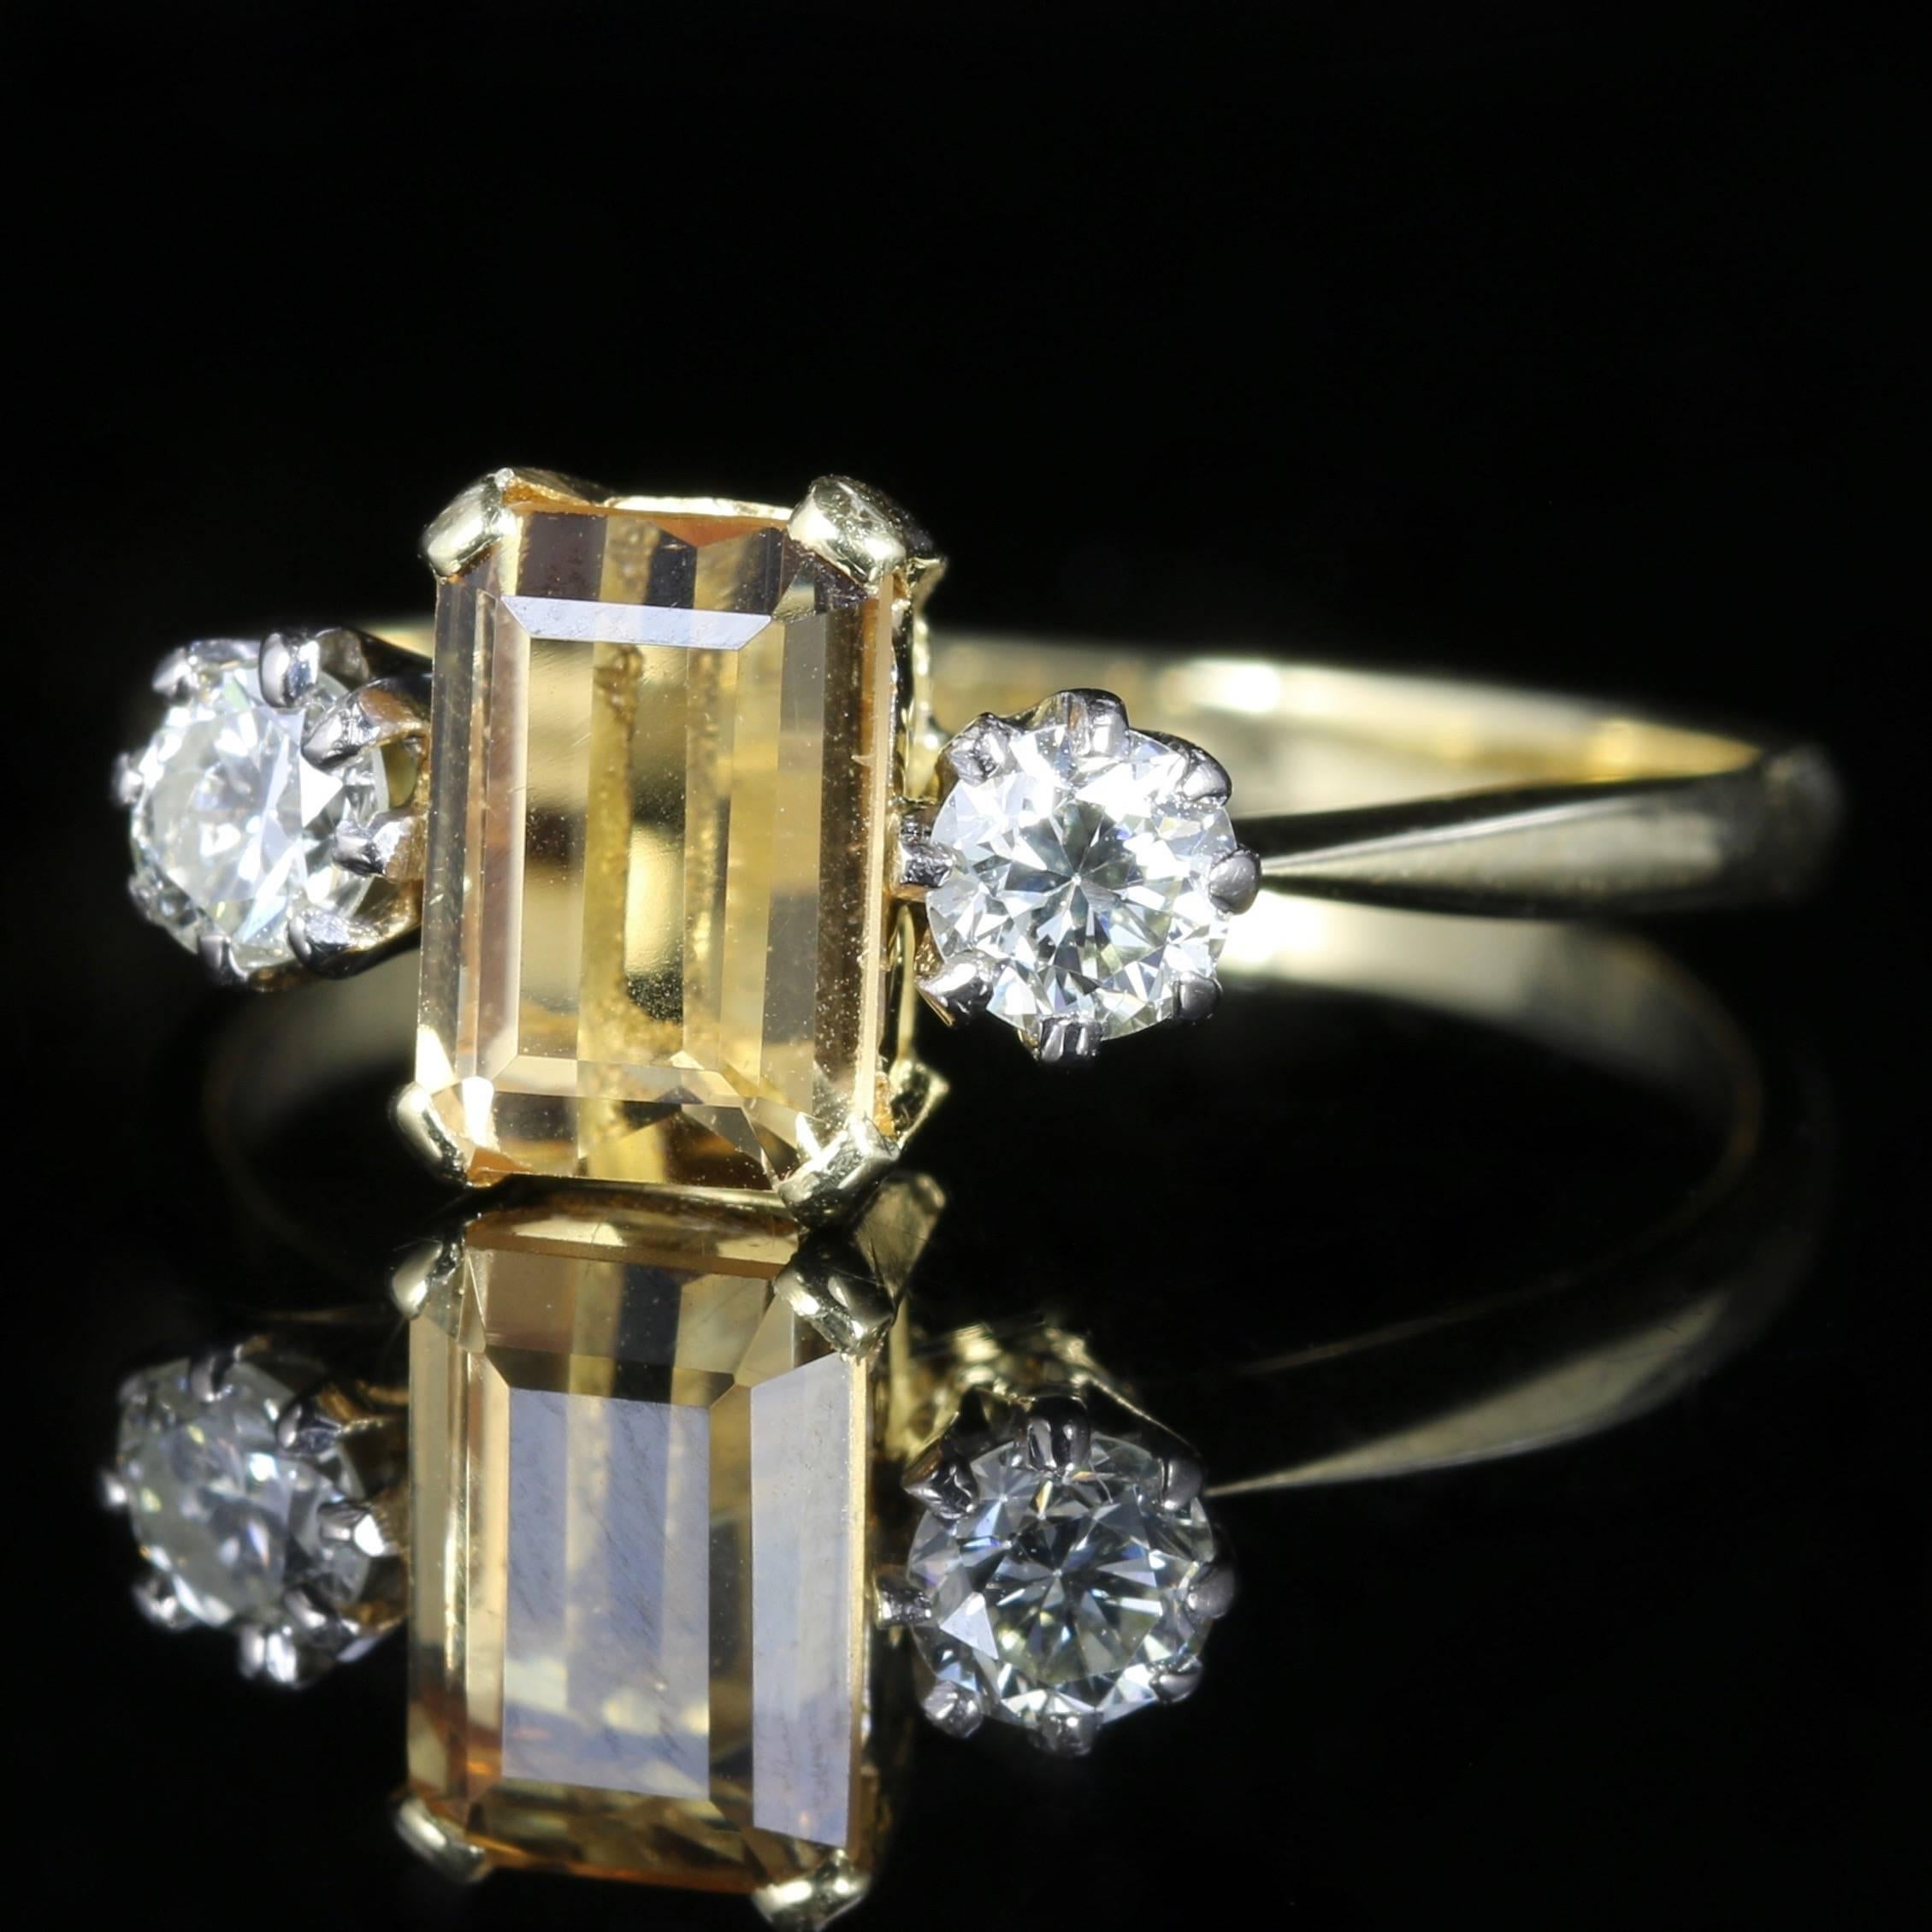 This fabulous 18ct Yellow Gold ring is set with a 1.15ct emerald cut Yellow Sapphire in the centre with two beautiful sparkling old cut Diamonds either side. 

Each Diamond is 0.60ct each 0.12ct in size.

The Diamonds are SI I colour

The Diamonds